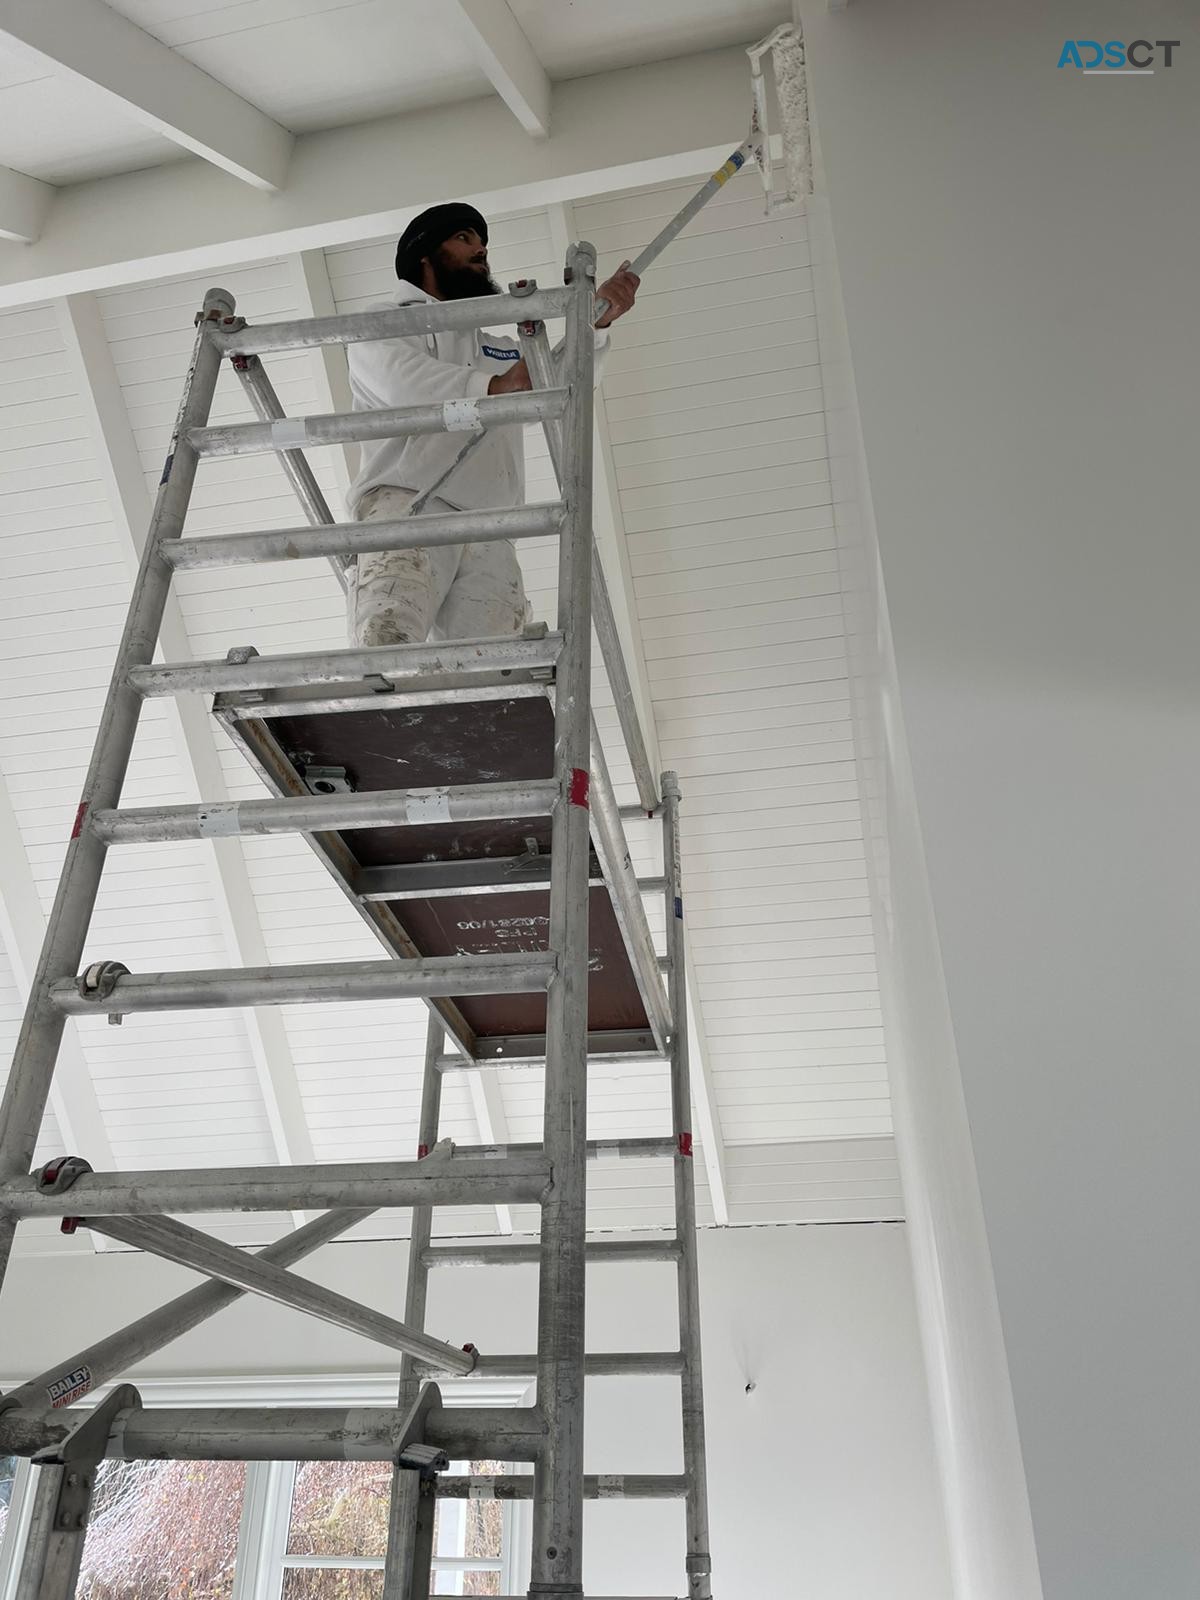 Experienced House Painting Expert Near You in Mornington